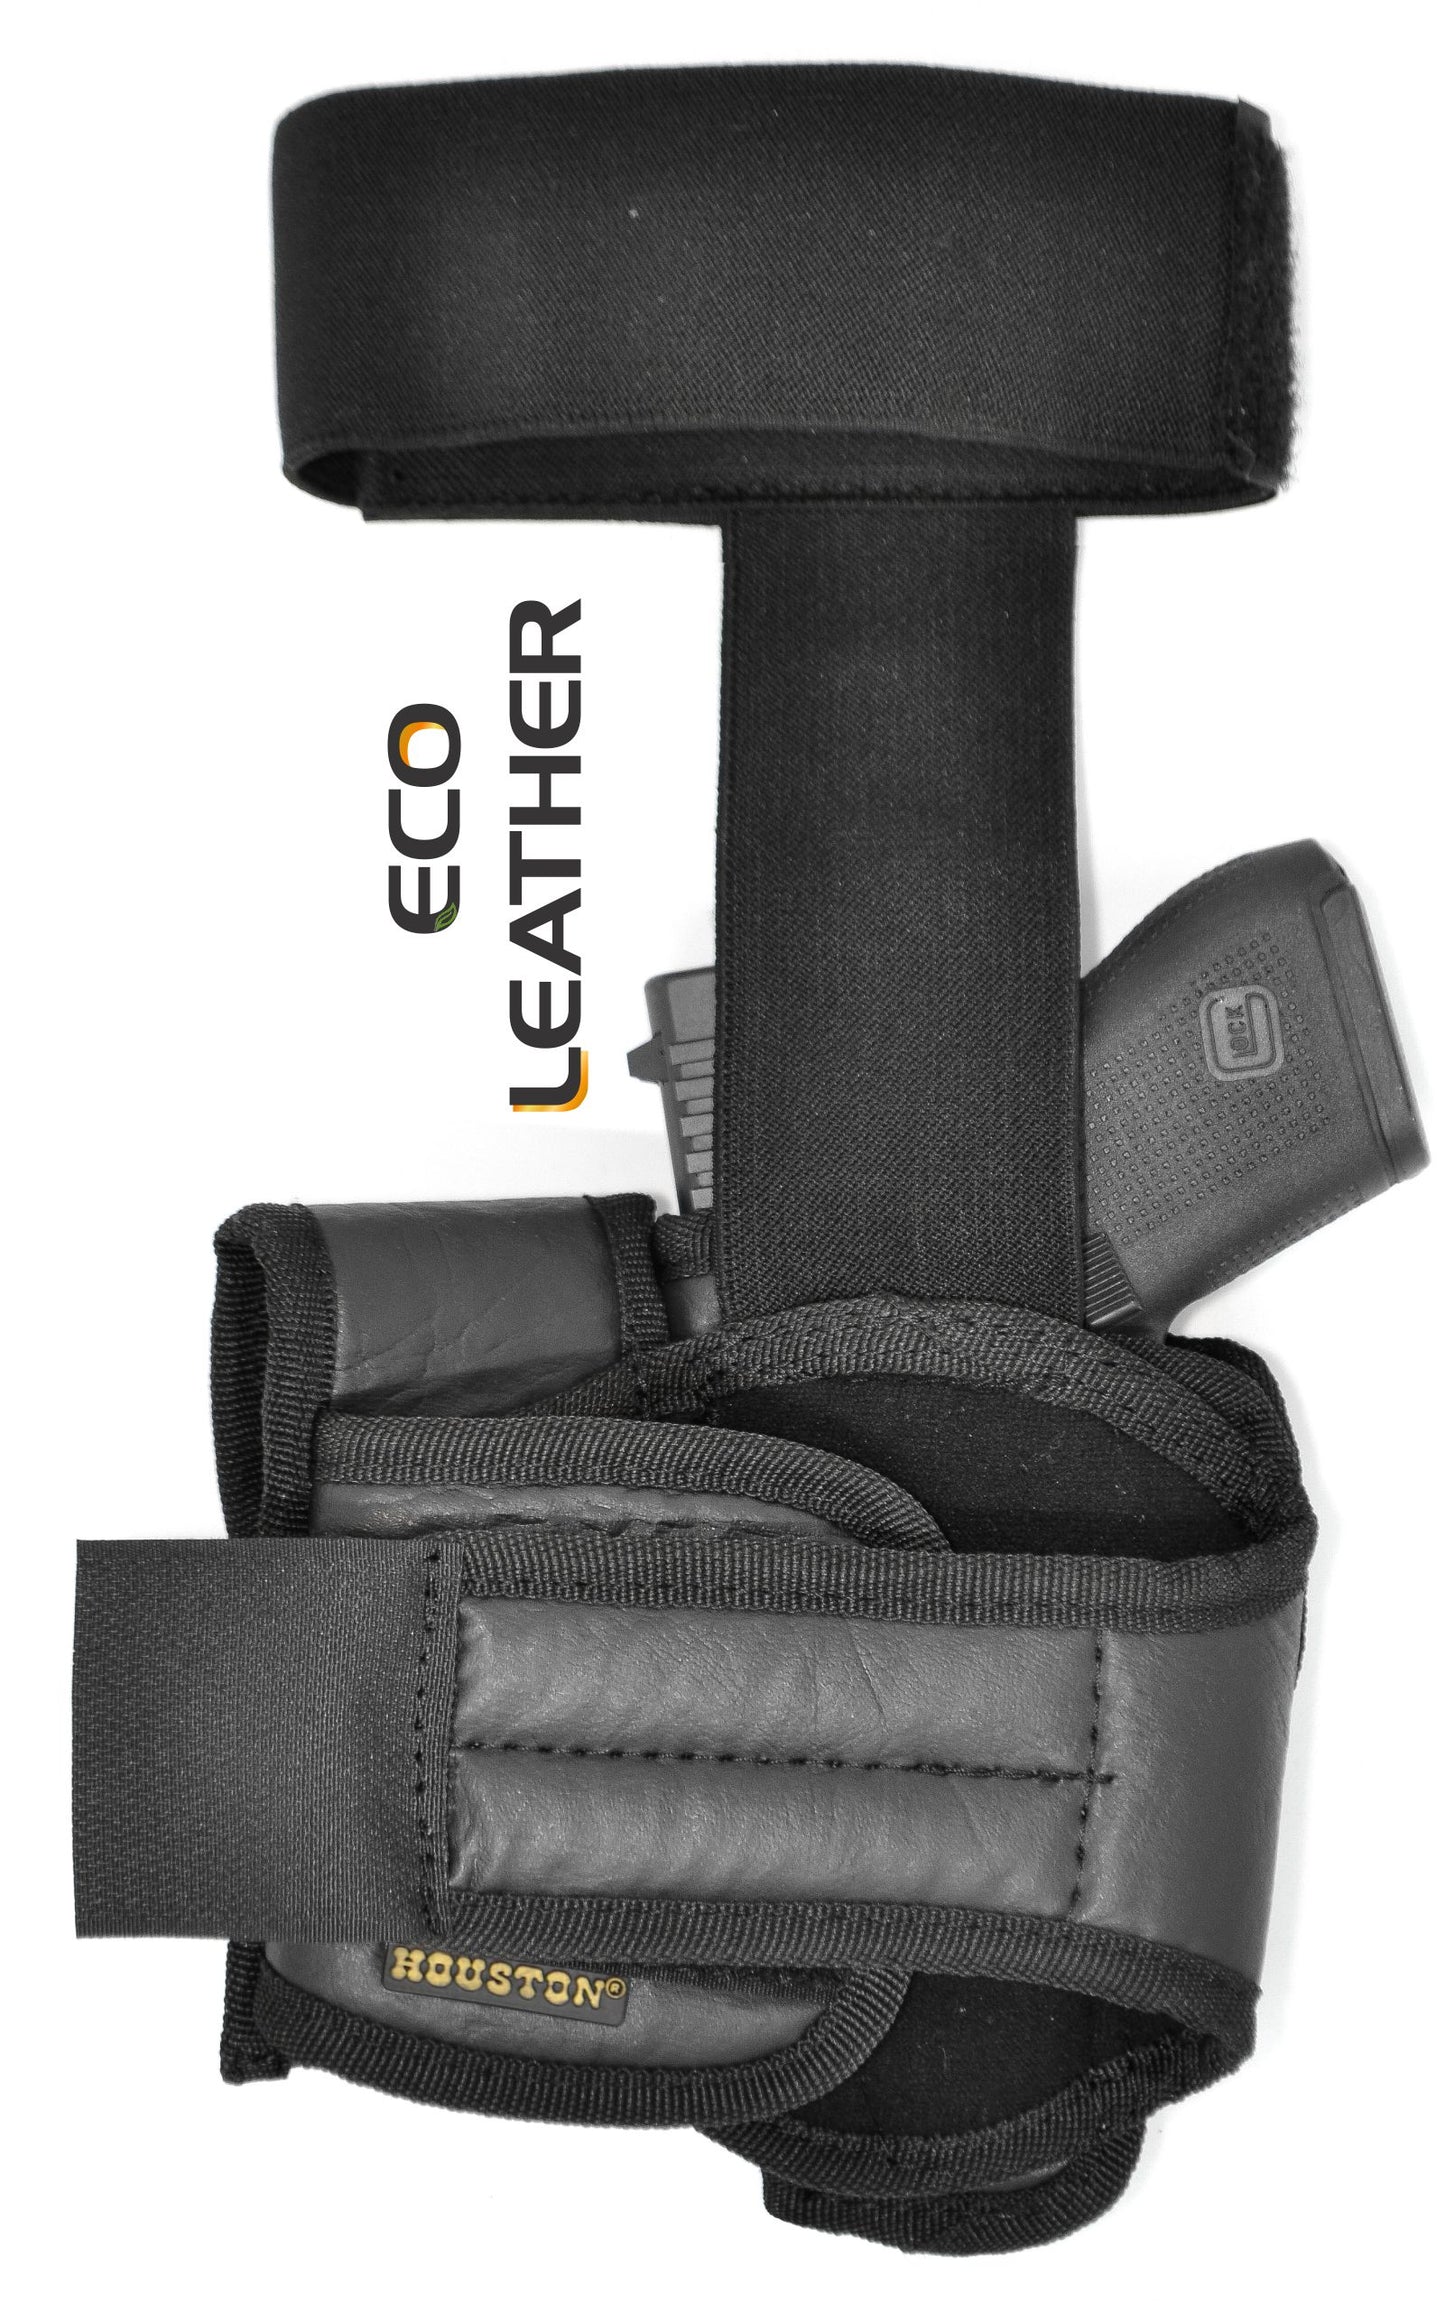 ECO-LEATHER Ankle Holsters